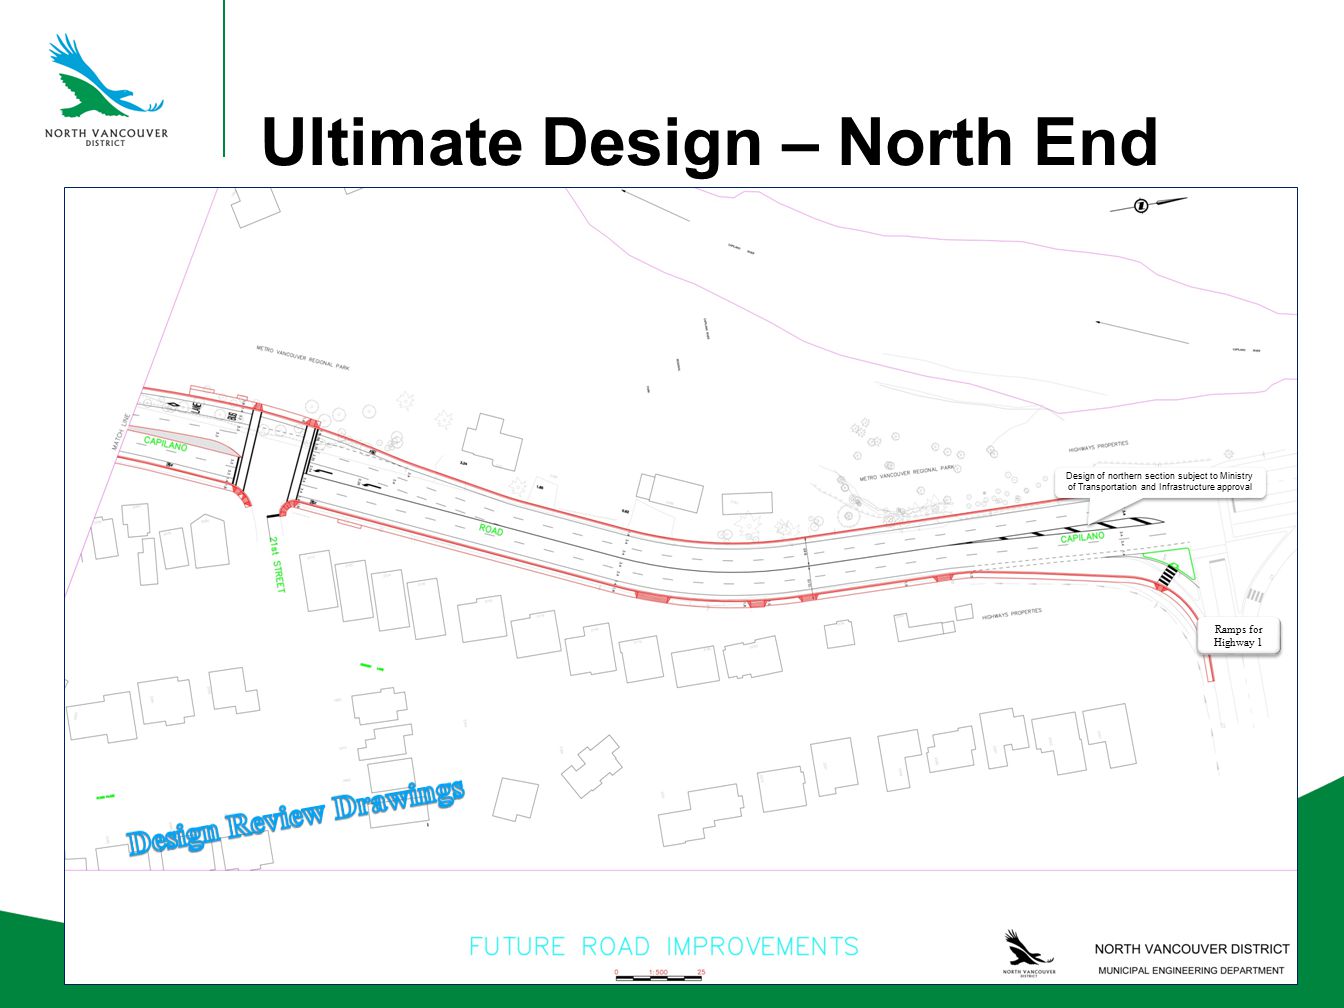 Ultimate Design – North End Ramps for Highway 1 Ramps for Highway 1 Design of northern section subject to Ministry of Transportation and Infrastructure approval